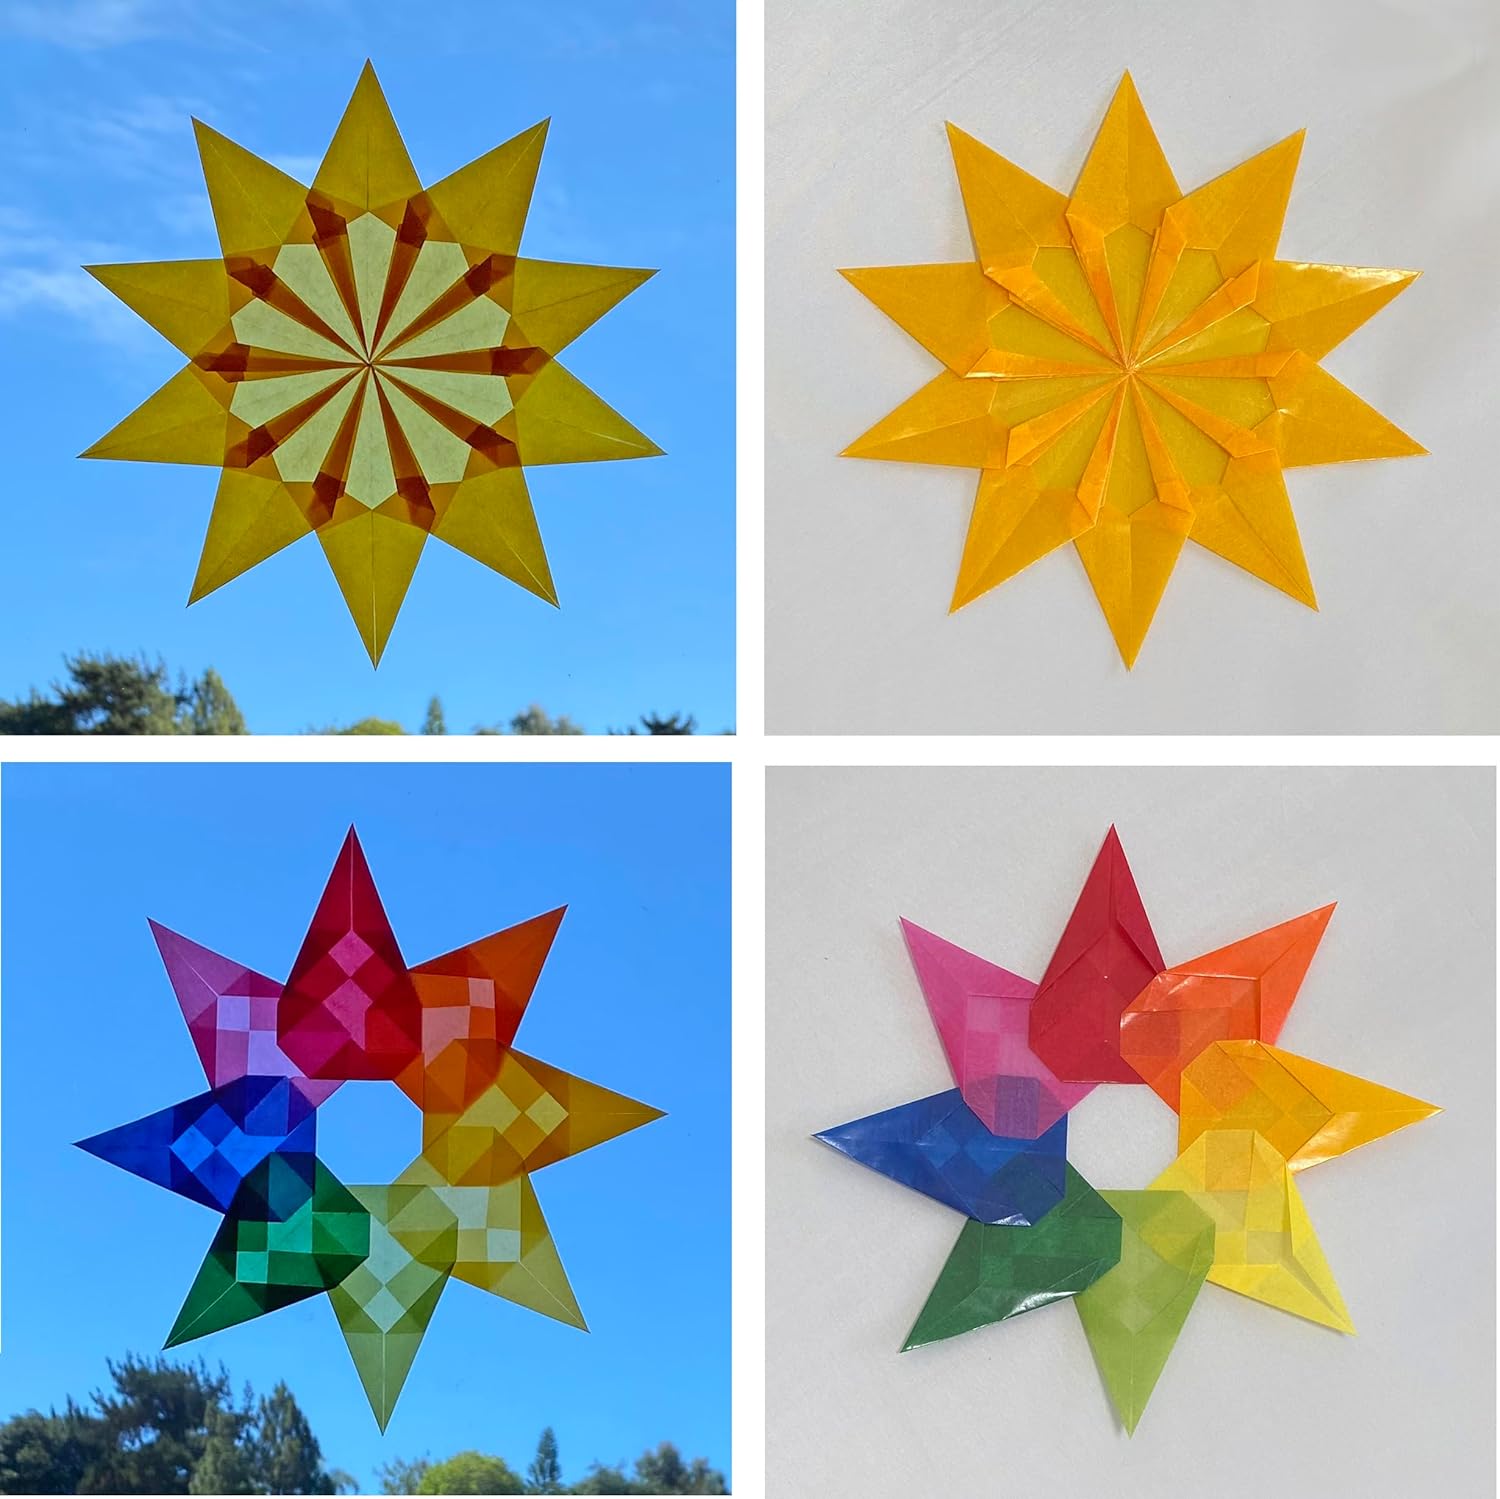 Translucent Or Kite Paper. Suitable For Making Window Stars Or Waldorf  Stars (8.5 X 8.5 Inch, 99 Sheets) 